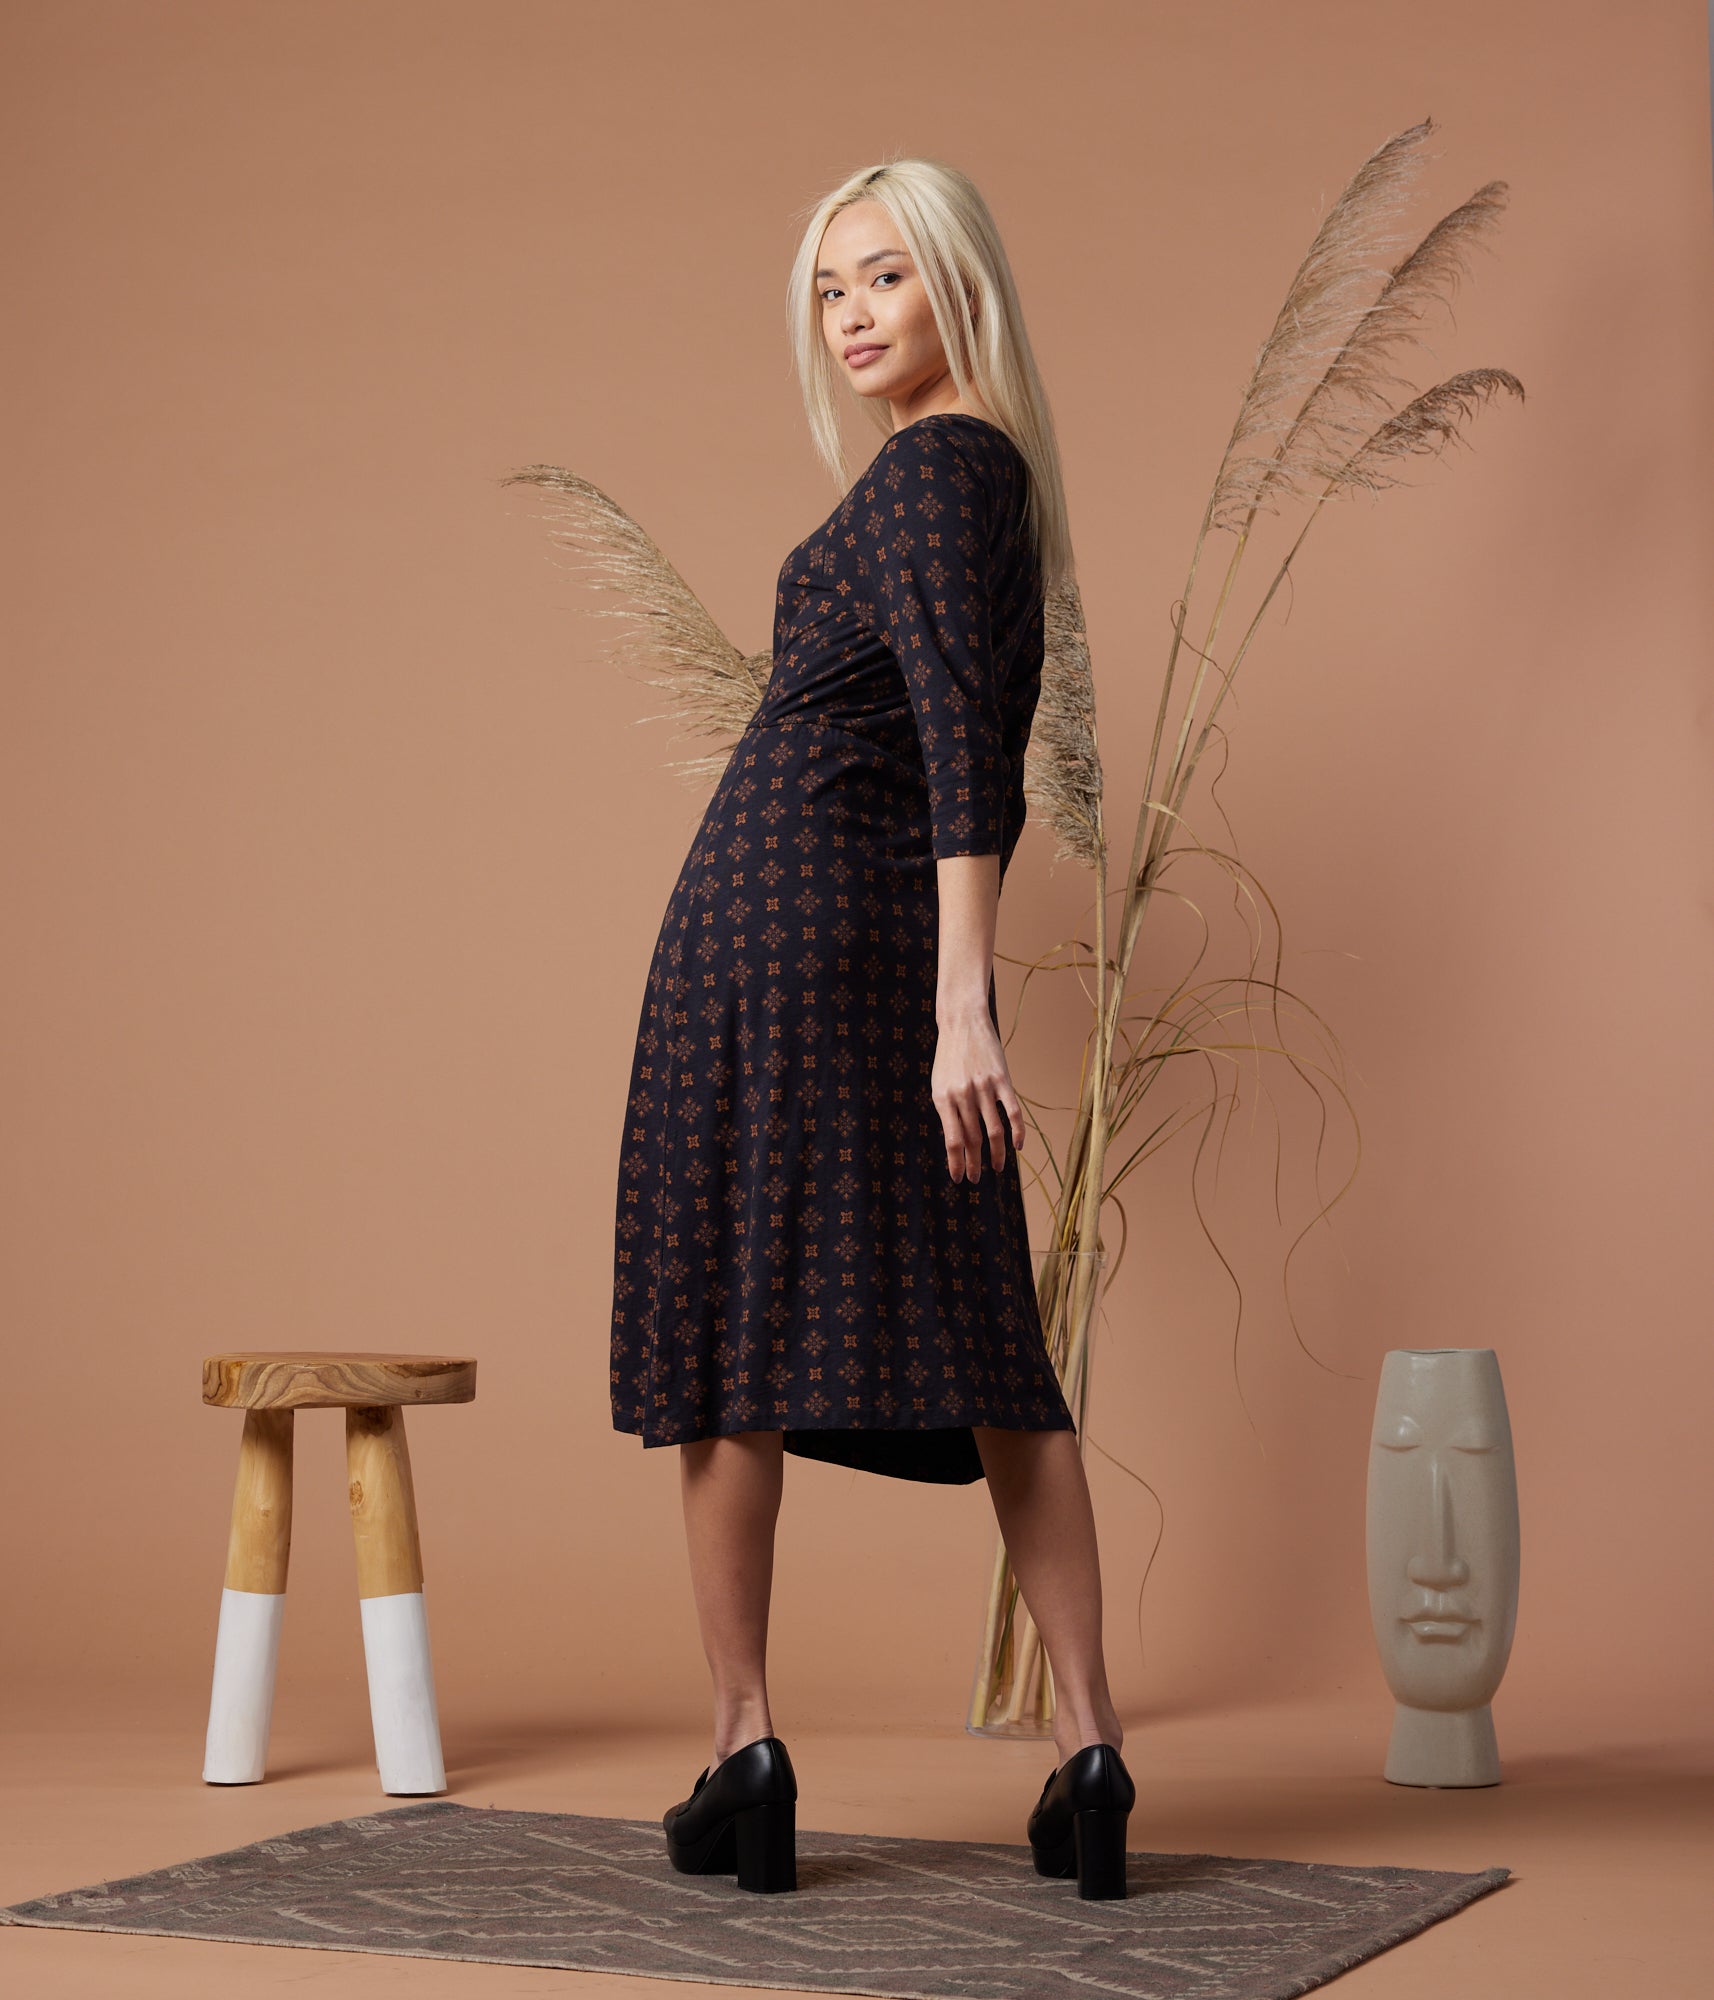 Ellery Dress by Known Supply